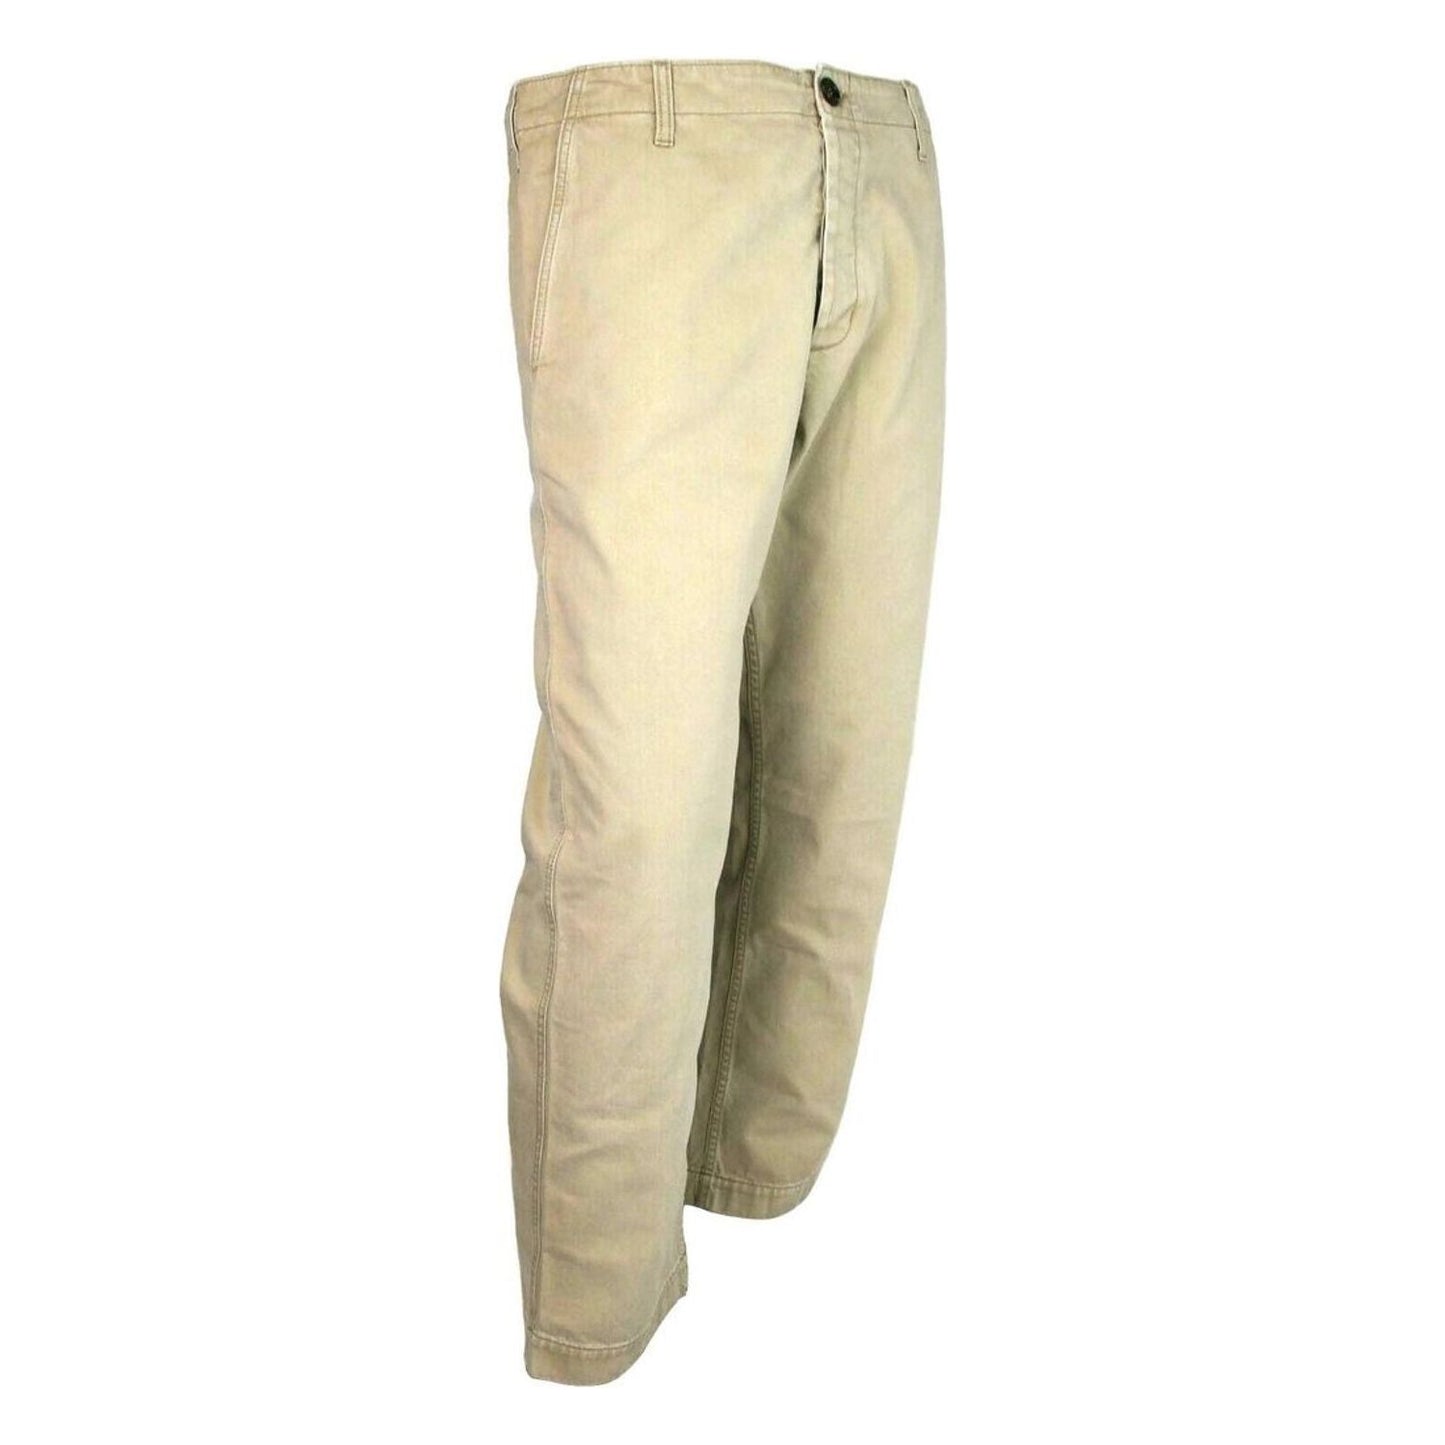 Gucci Light Brown Washed Cotton Pant Gucci Print light-brown-washed-cotton-pant-gucci-print 489281-2028-us-32__3-80b77436-68e.jpg